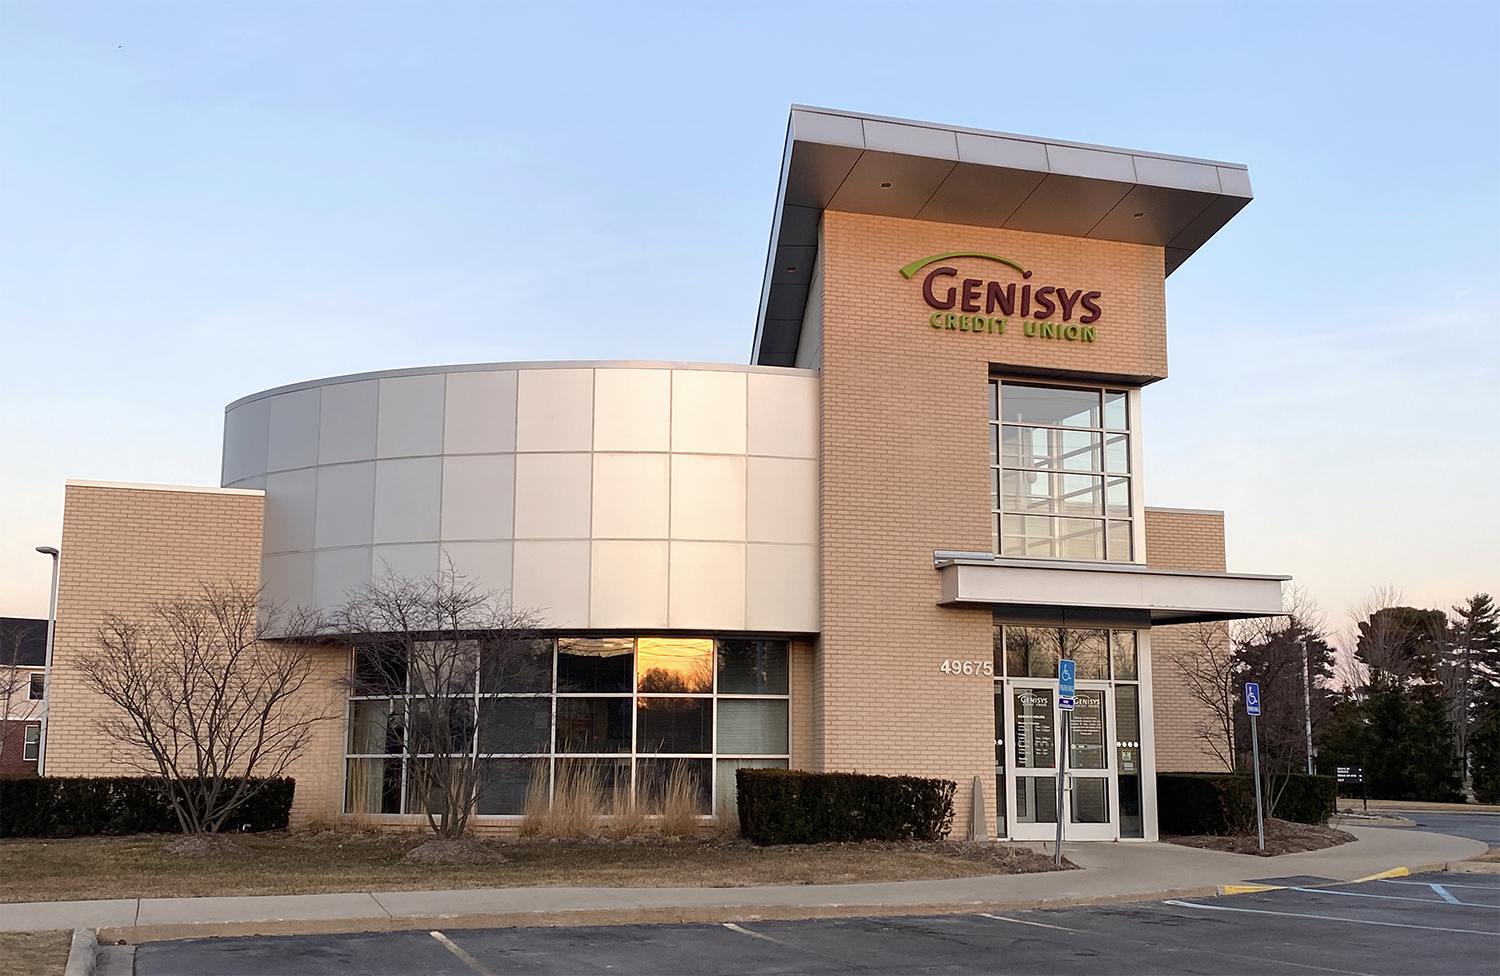 Genisys Credit Union in Shelby Twp., MI